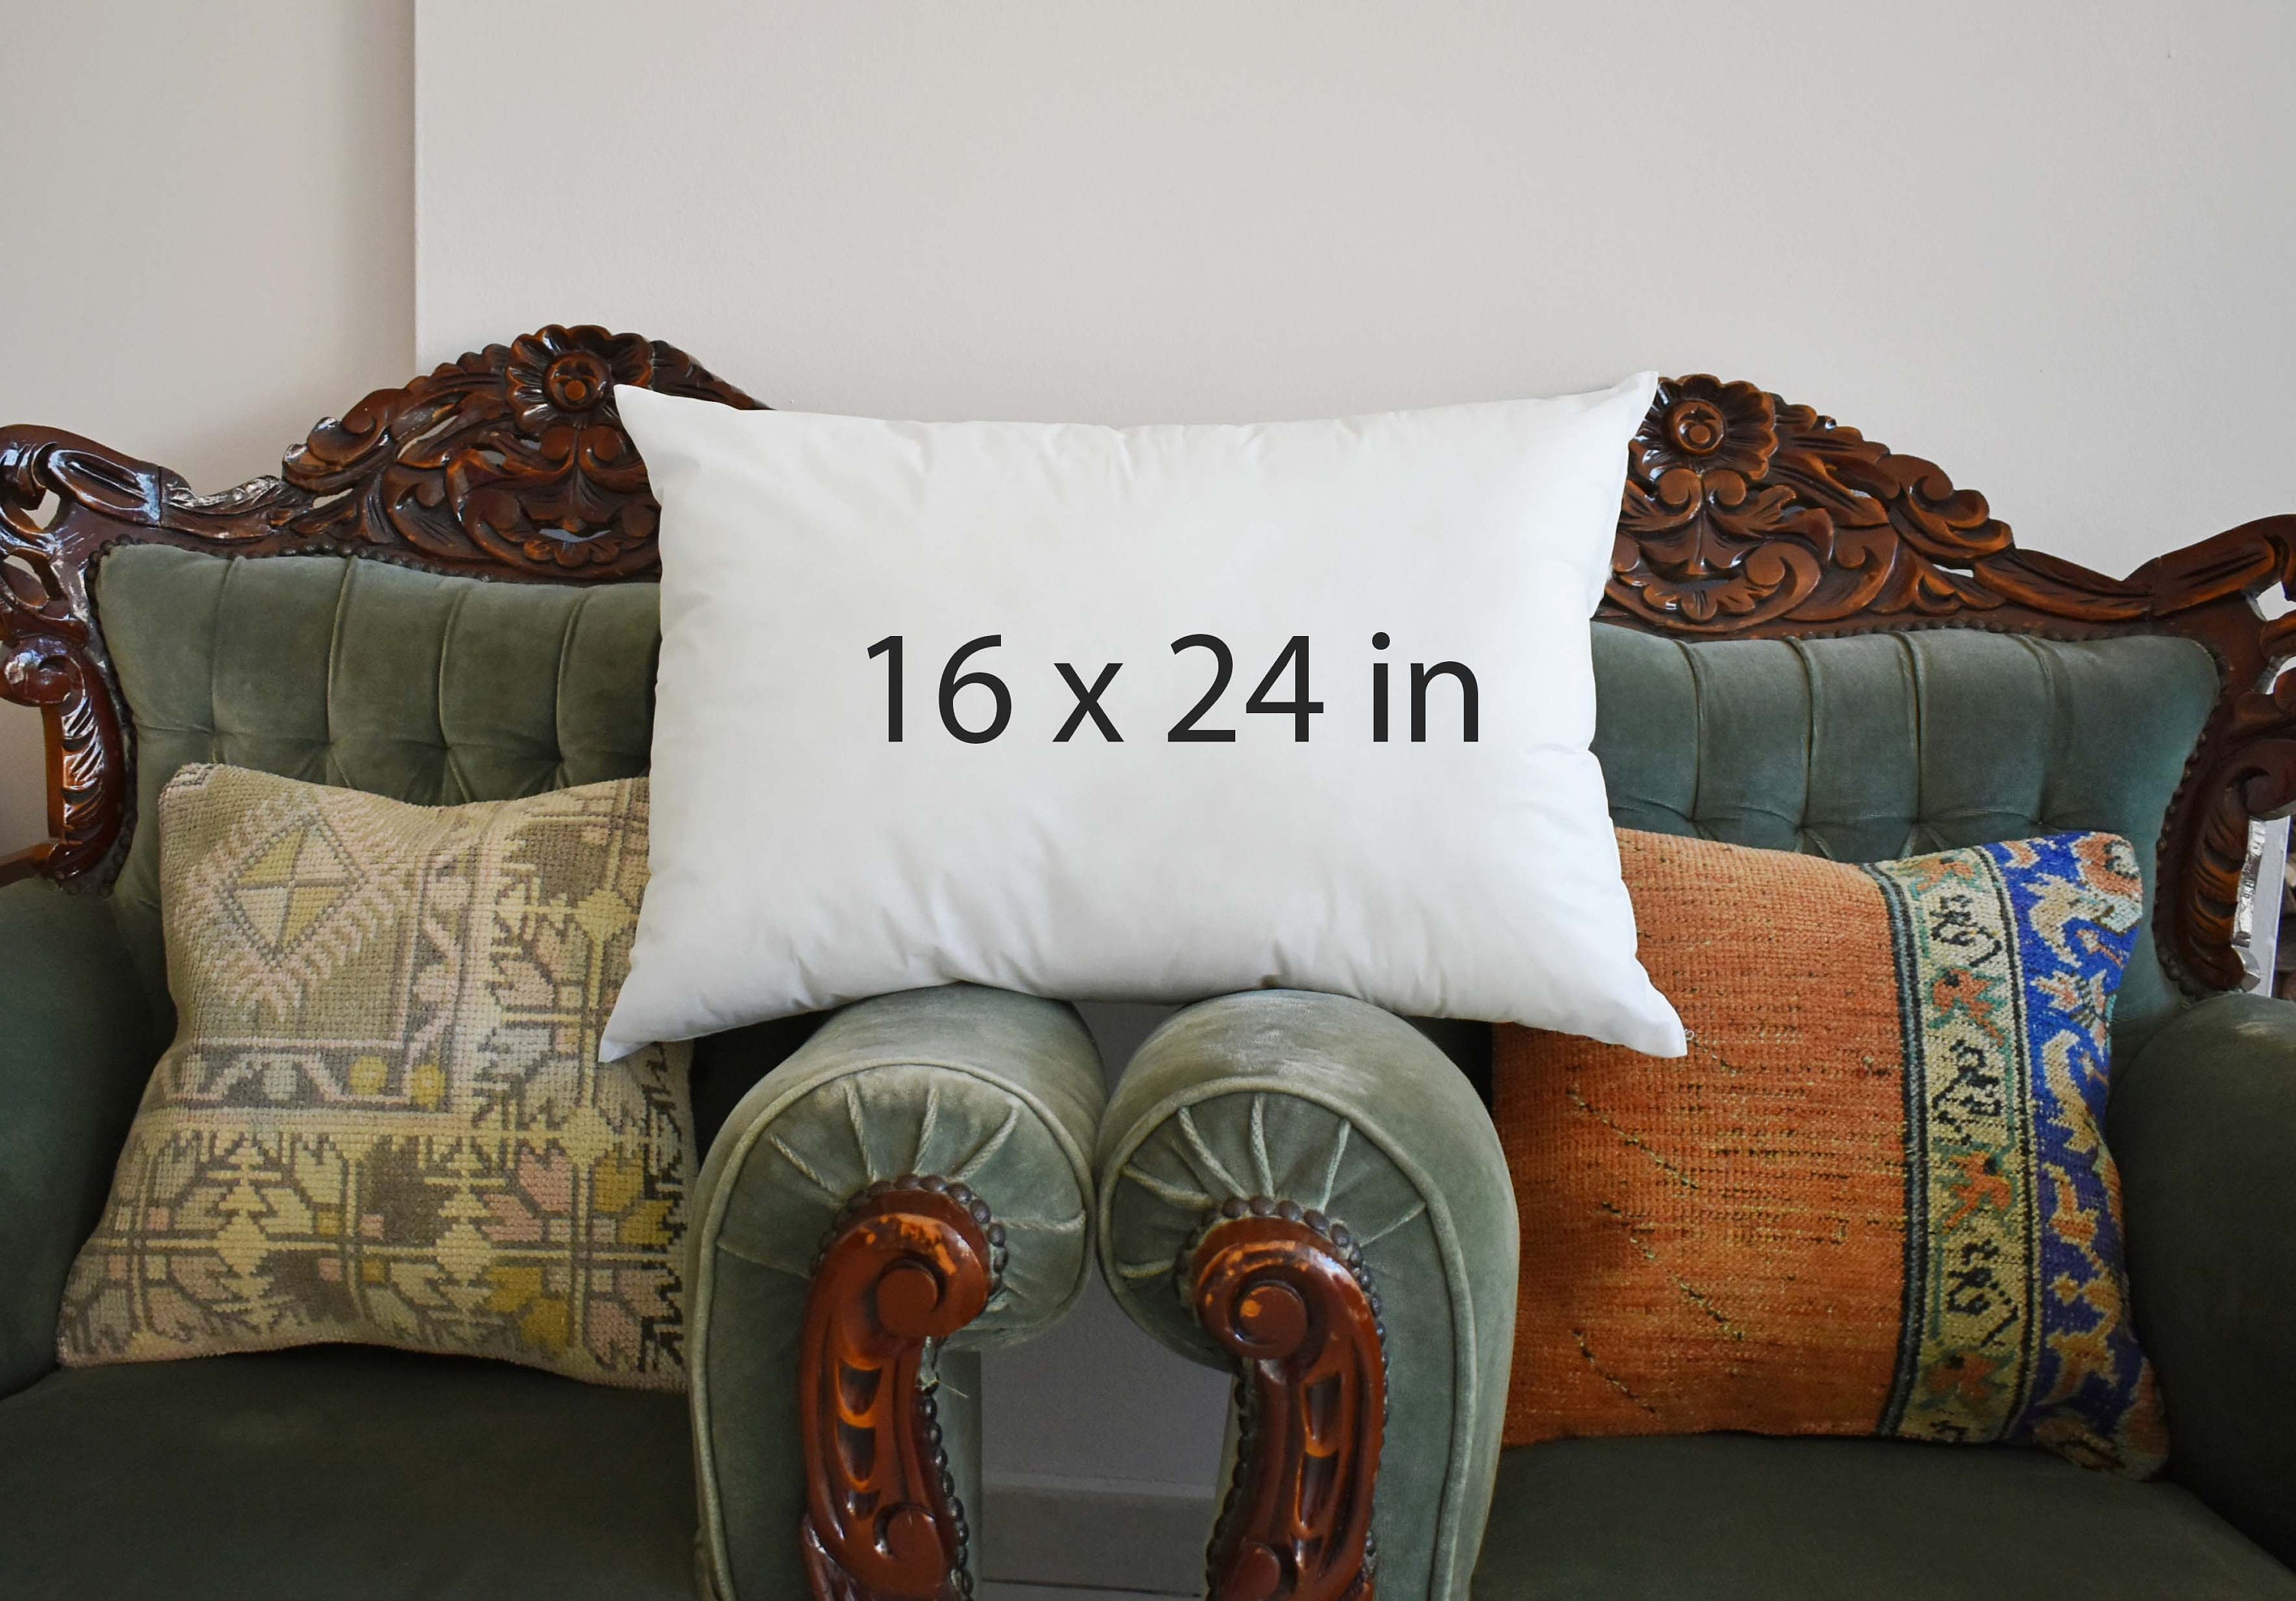 16x24 Decorative Throw Pillow Insert, Down and Feathers Fill, 100